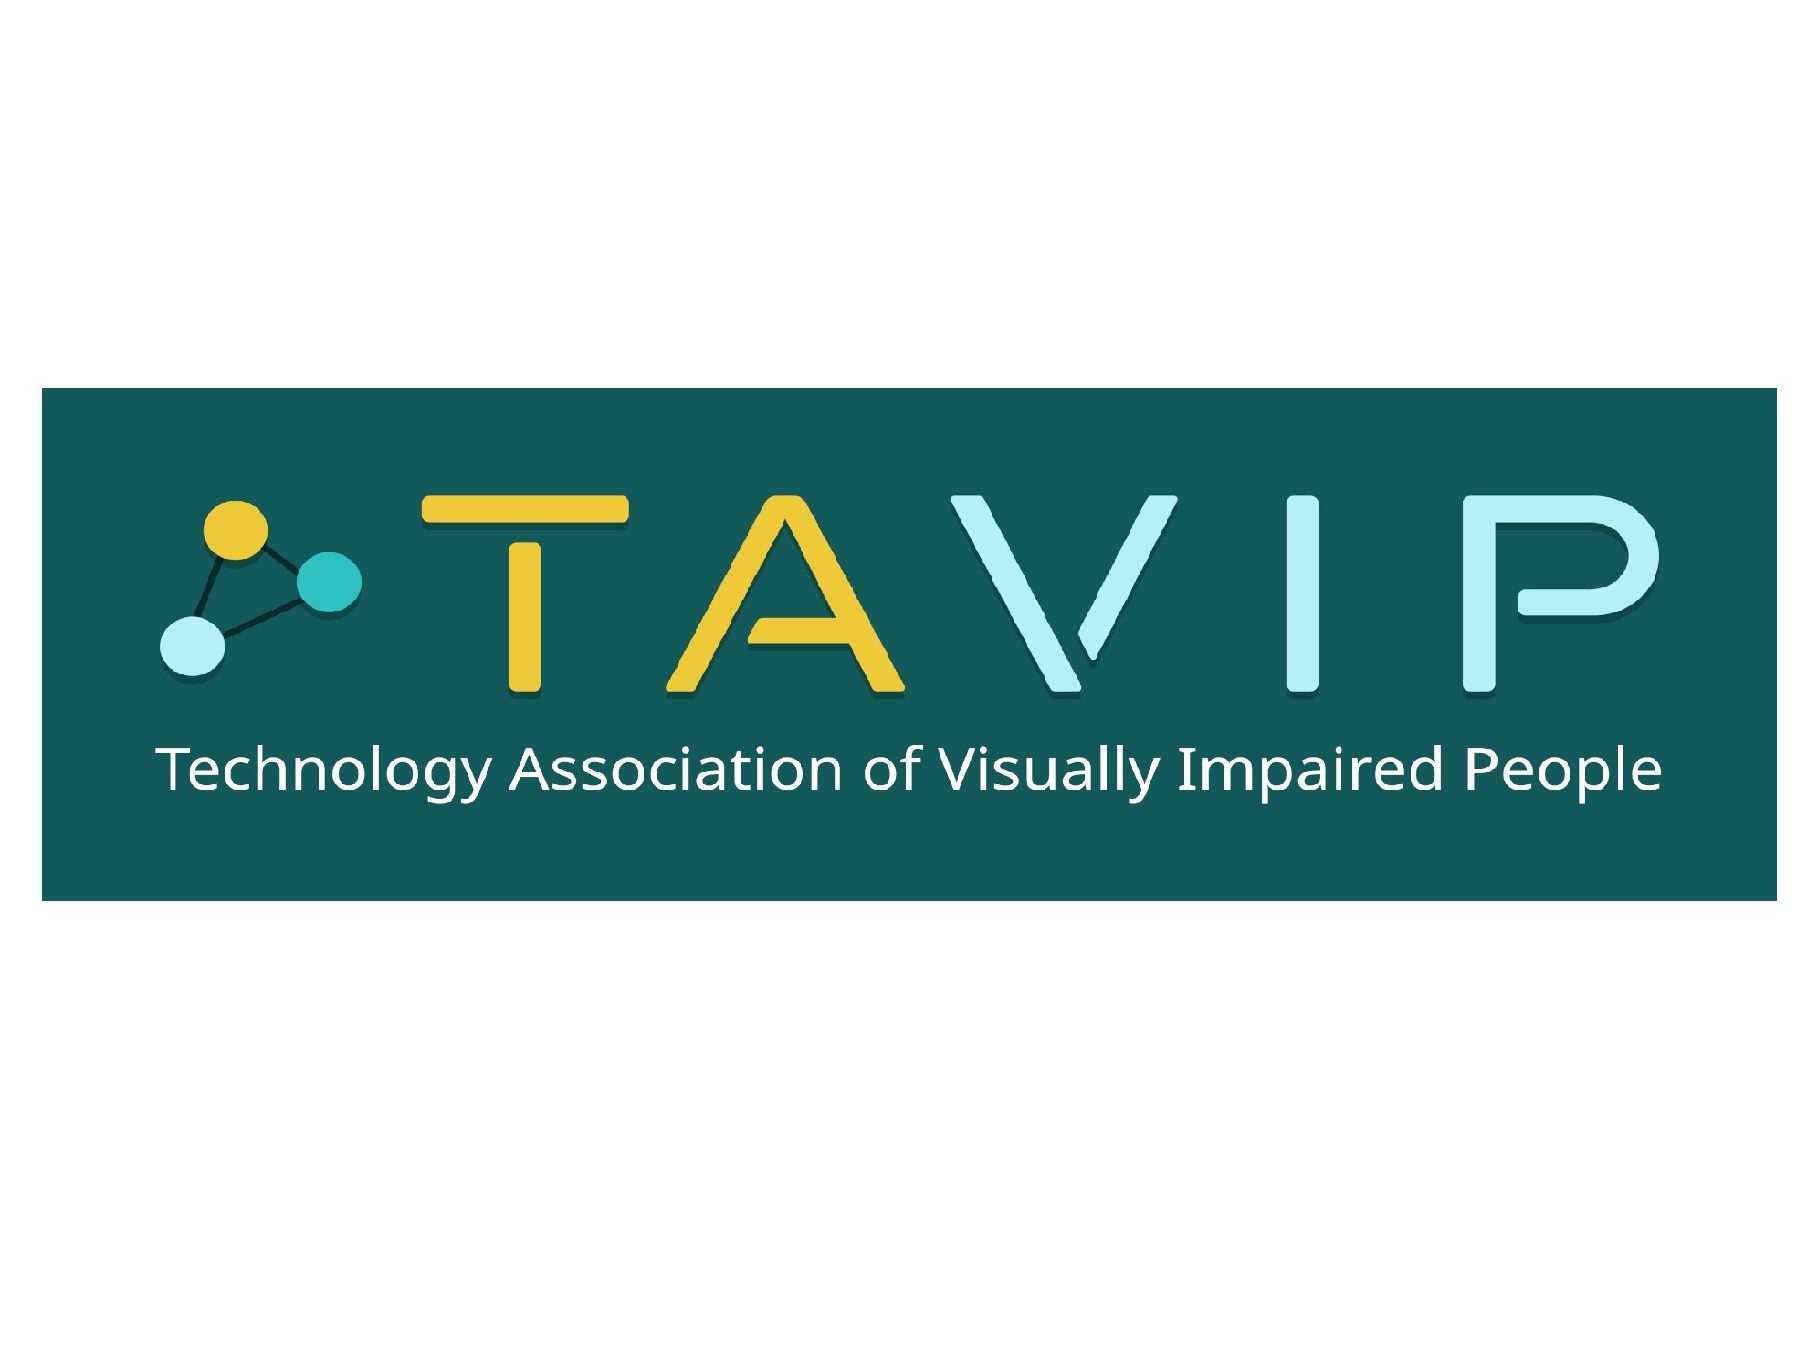 TAVIP (Technology Association of Visually Impaired People) logo